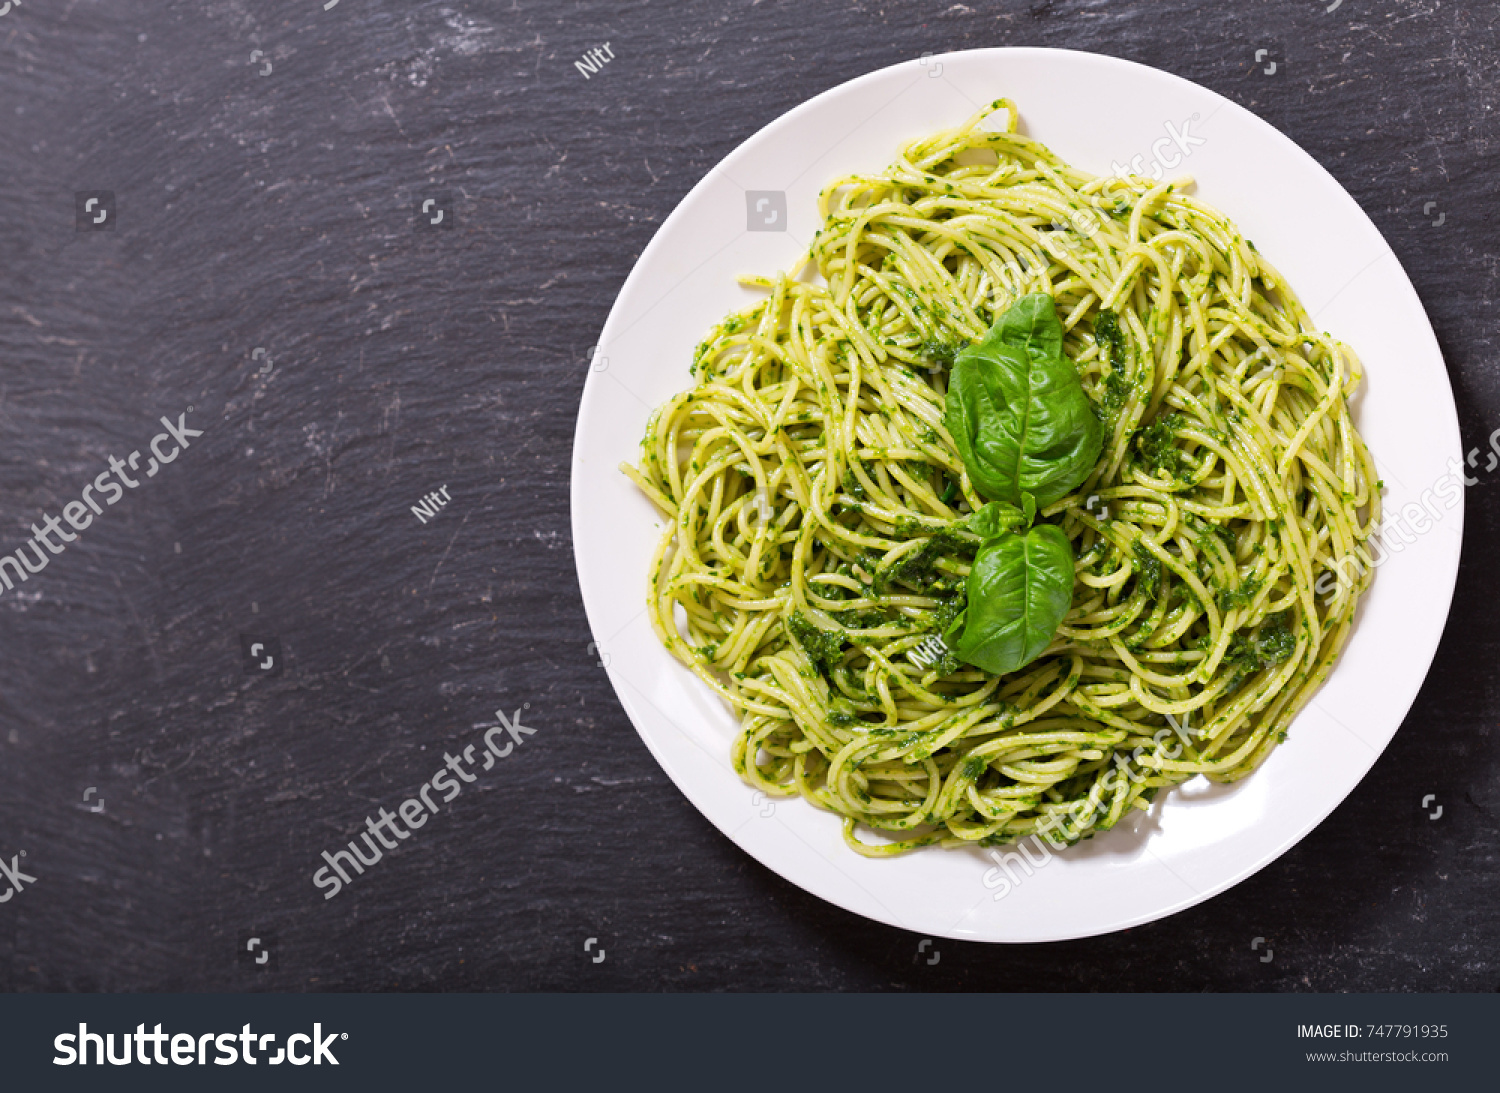 plate of pasta with pesto sauce on dark background, top view #747791935